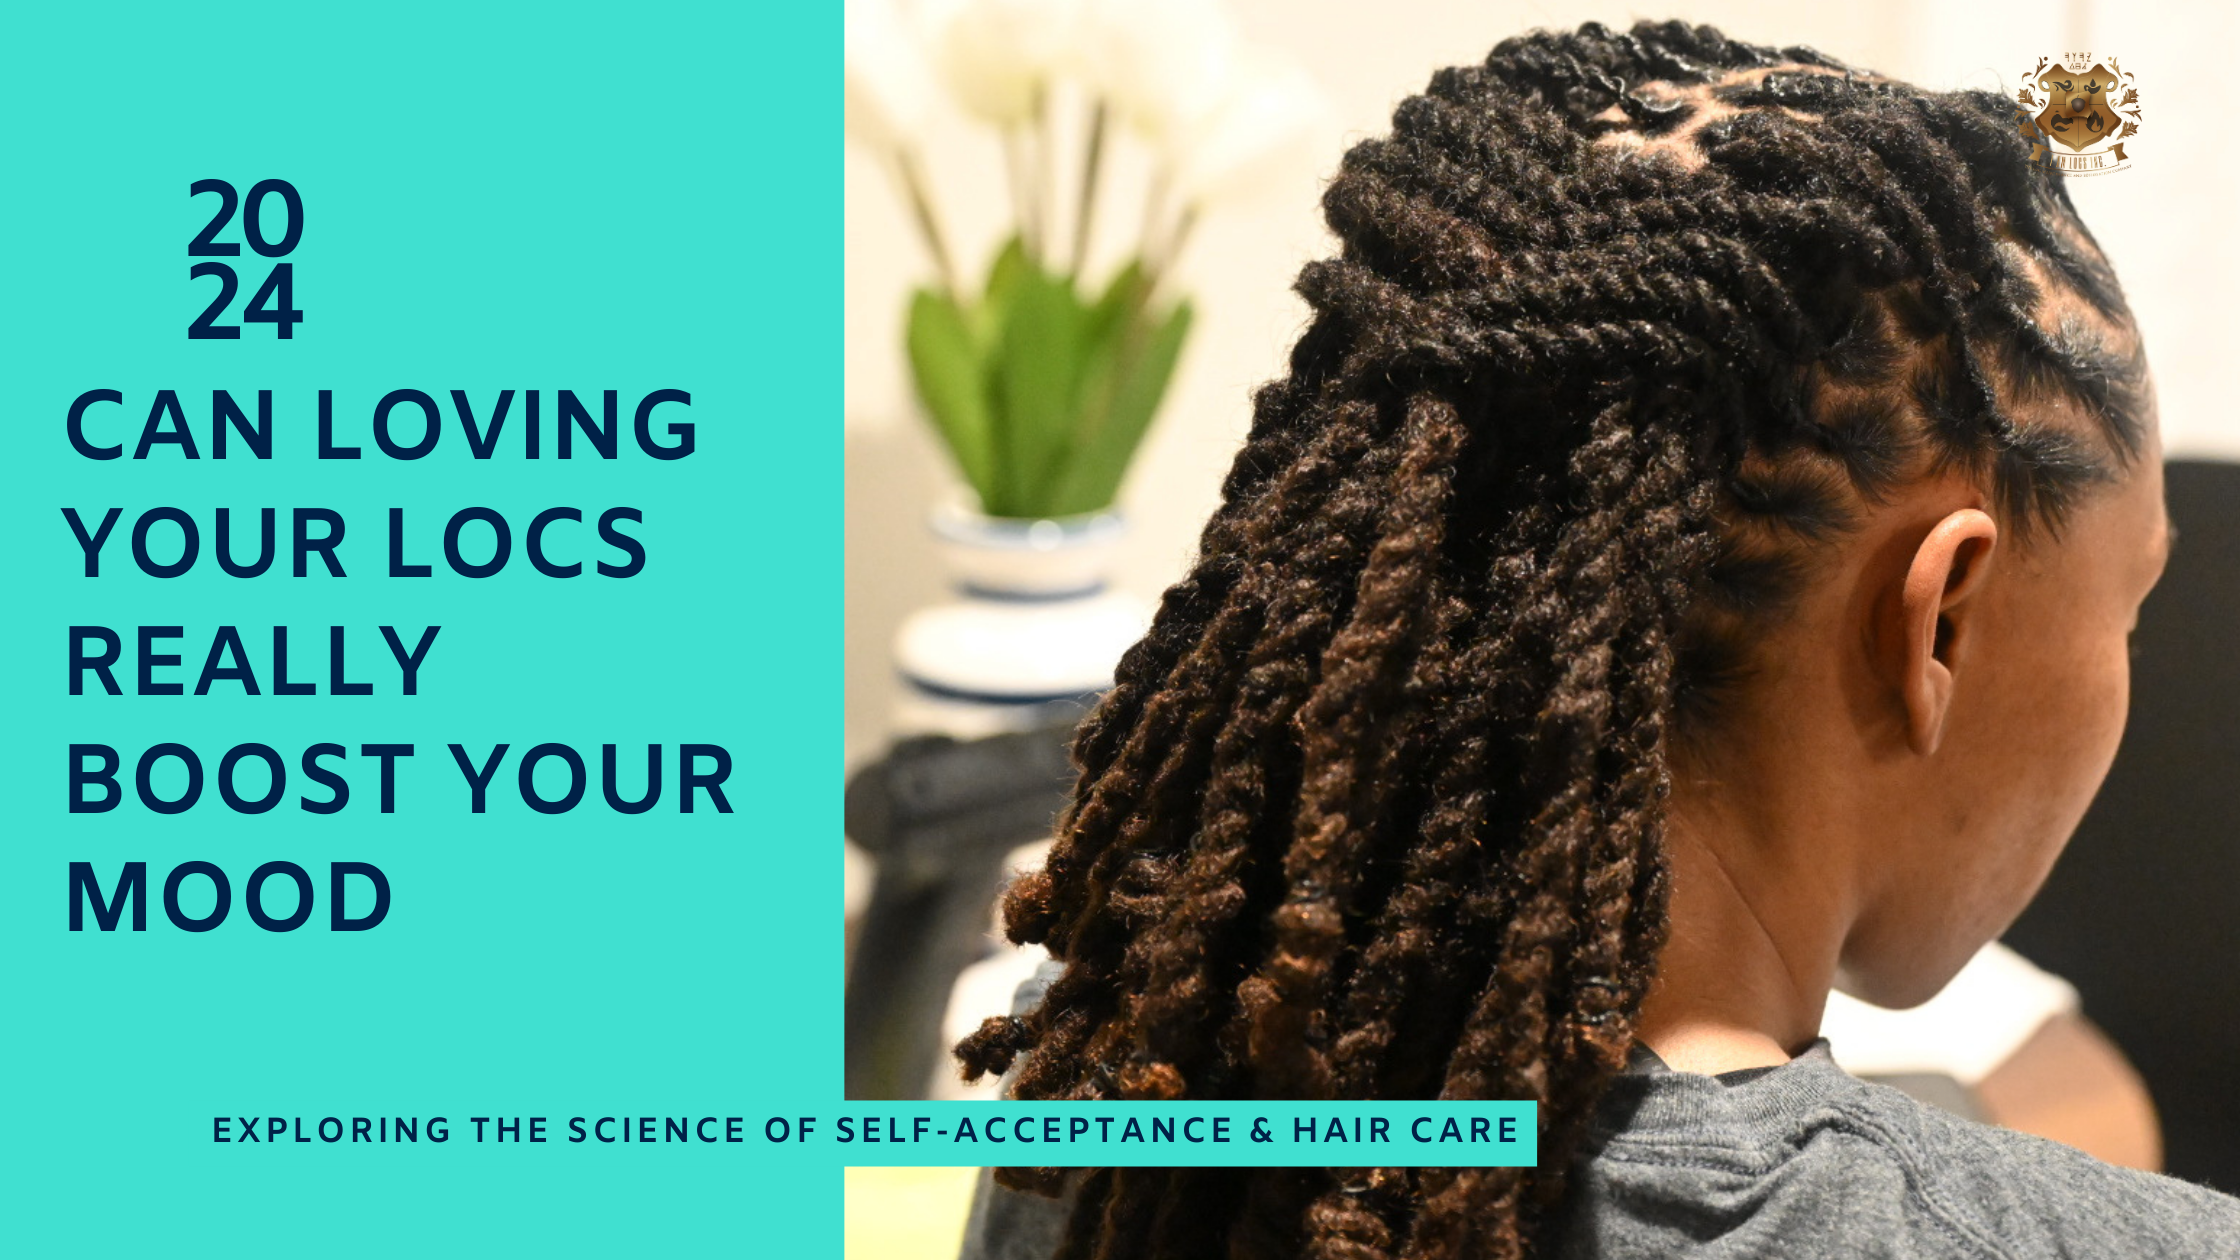 A close-up of a stunning loc style, showcasing well-maintained, vibrant locs. The photo highlights the intricate beauty and individuality of the hairstyle, symbolizing self-expression and confidence. This image represents the transformative impact of loving and caring for one's locs on mood and overall well-being.